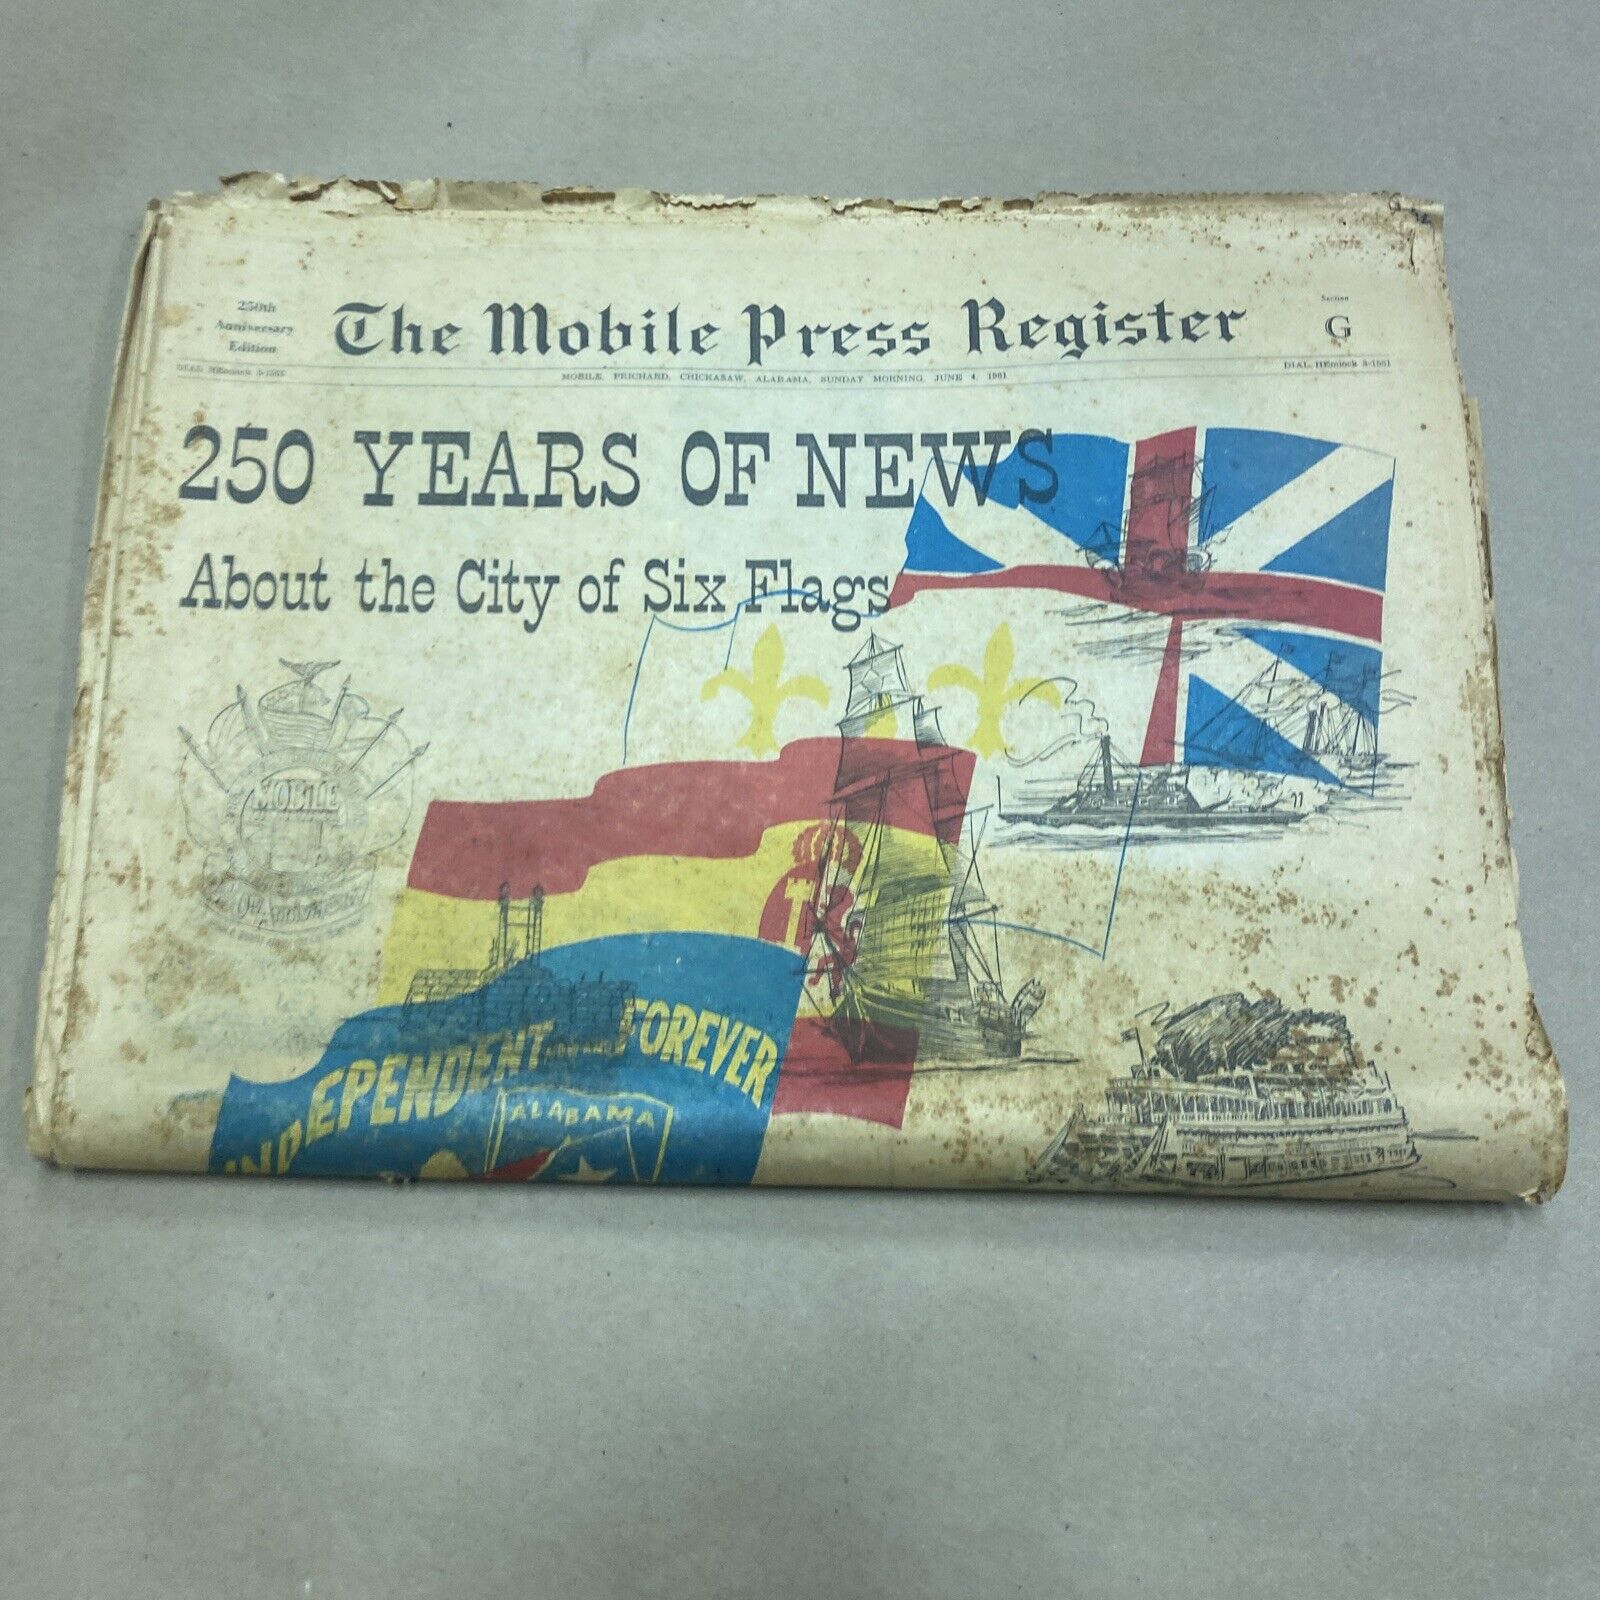 The Mobile Press Register ‘250 Years of News’ June 4, 1961 Newspaper